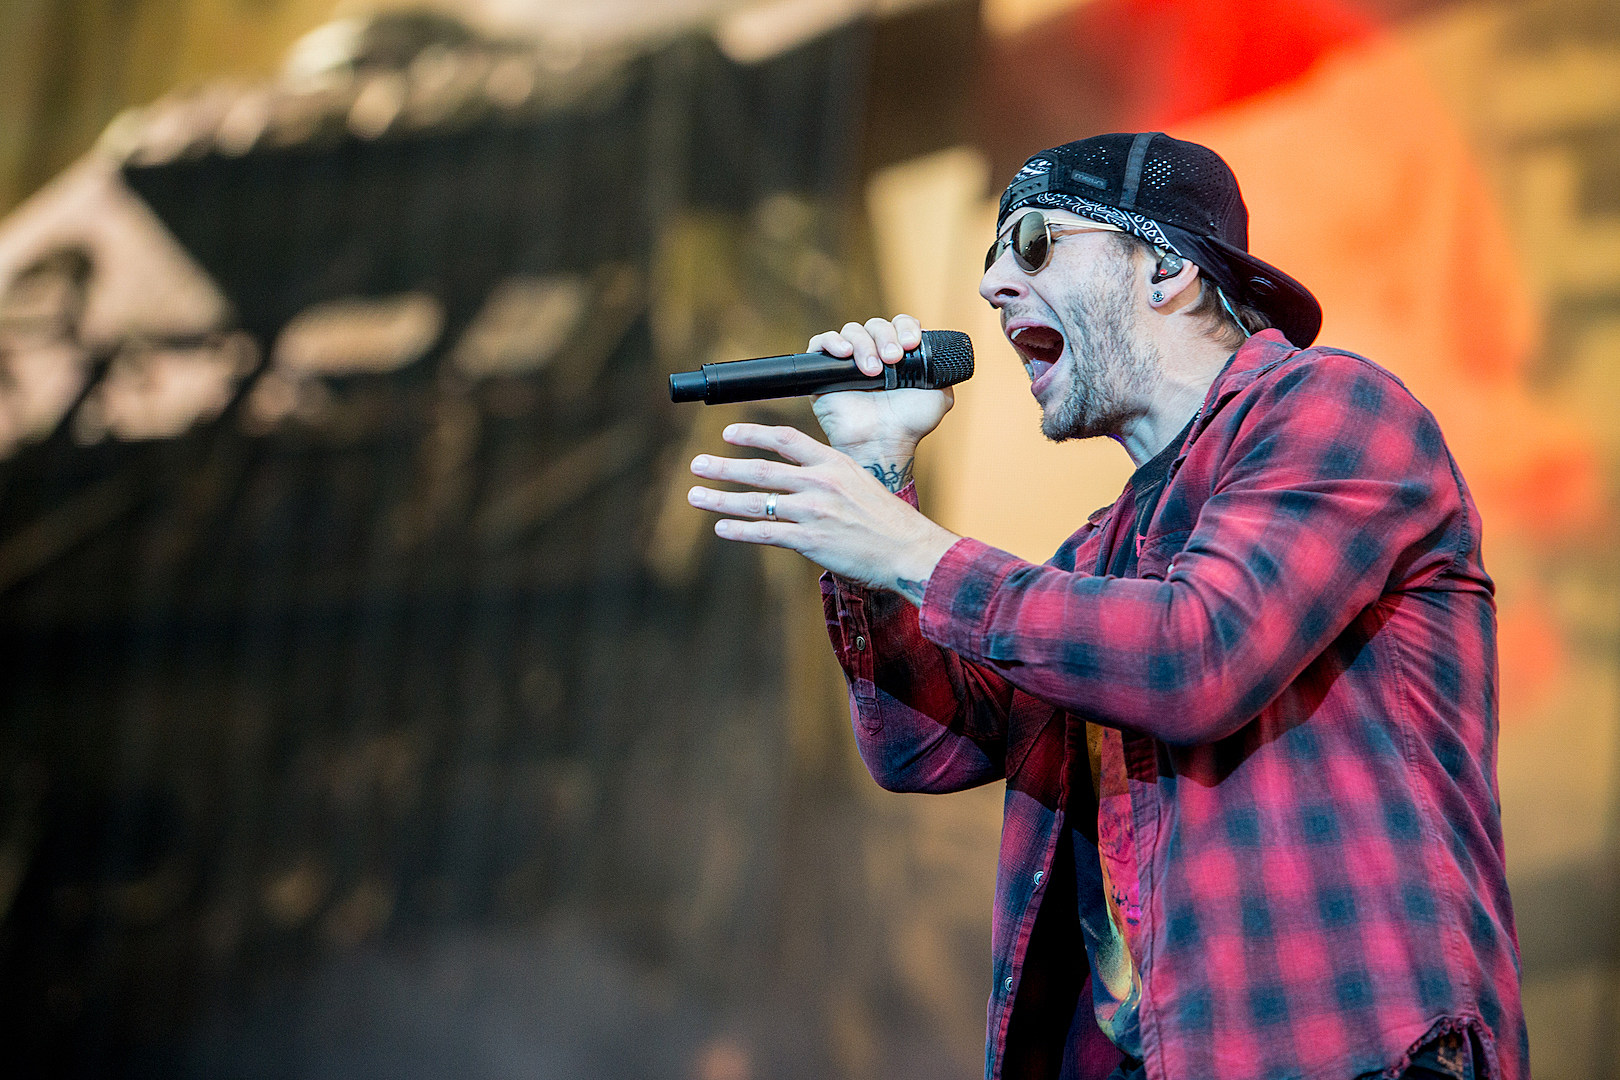 Avenged Sevenfold at Freedom Mortgage Pavilion [GALLERY]